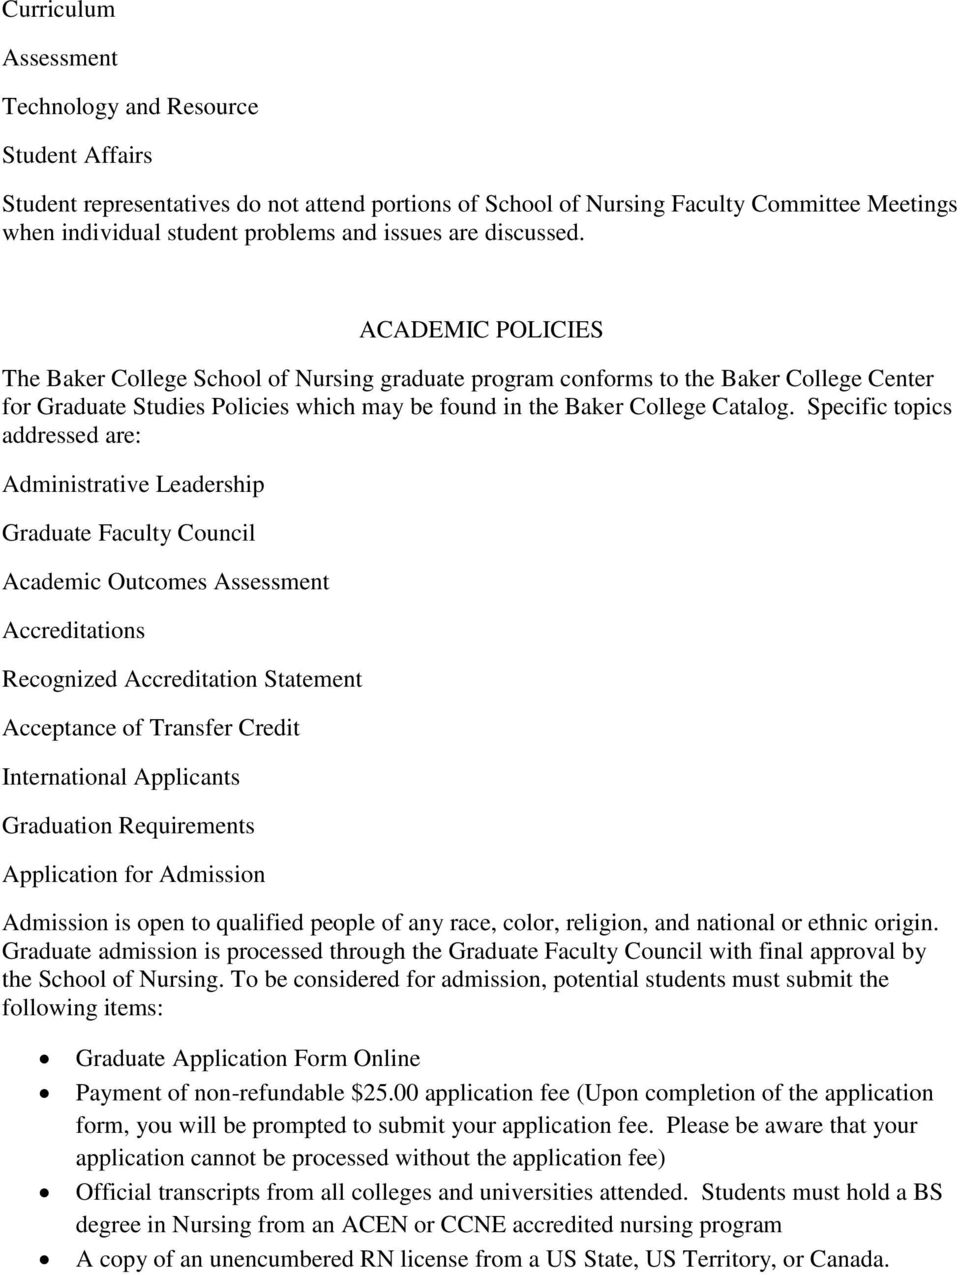 ACADEMIC POLICIES The Baker College School of Nursing graduate program conforms to the Baker College Center for Graduate Studies Policies which may be found in the Baker College Catalog.